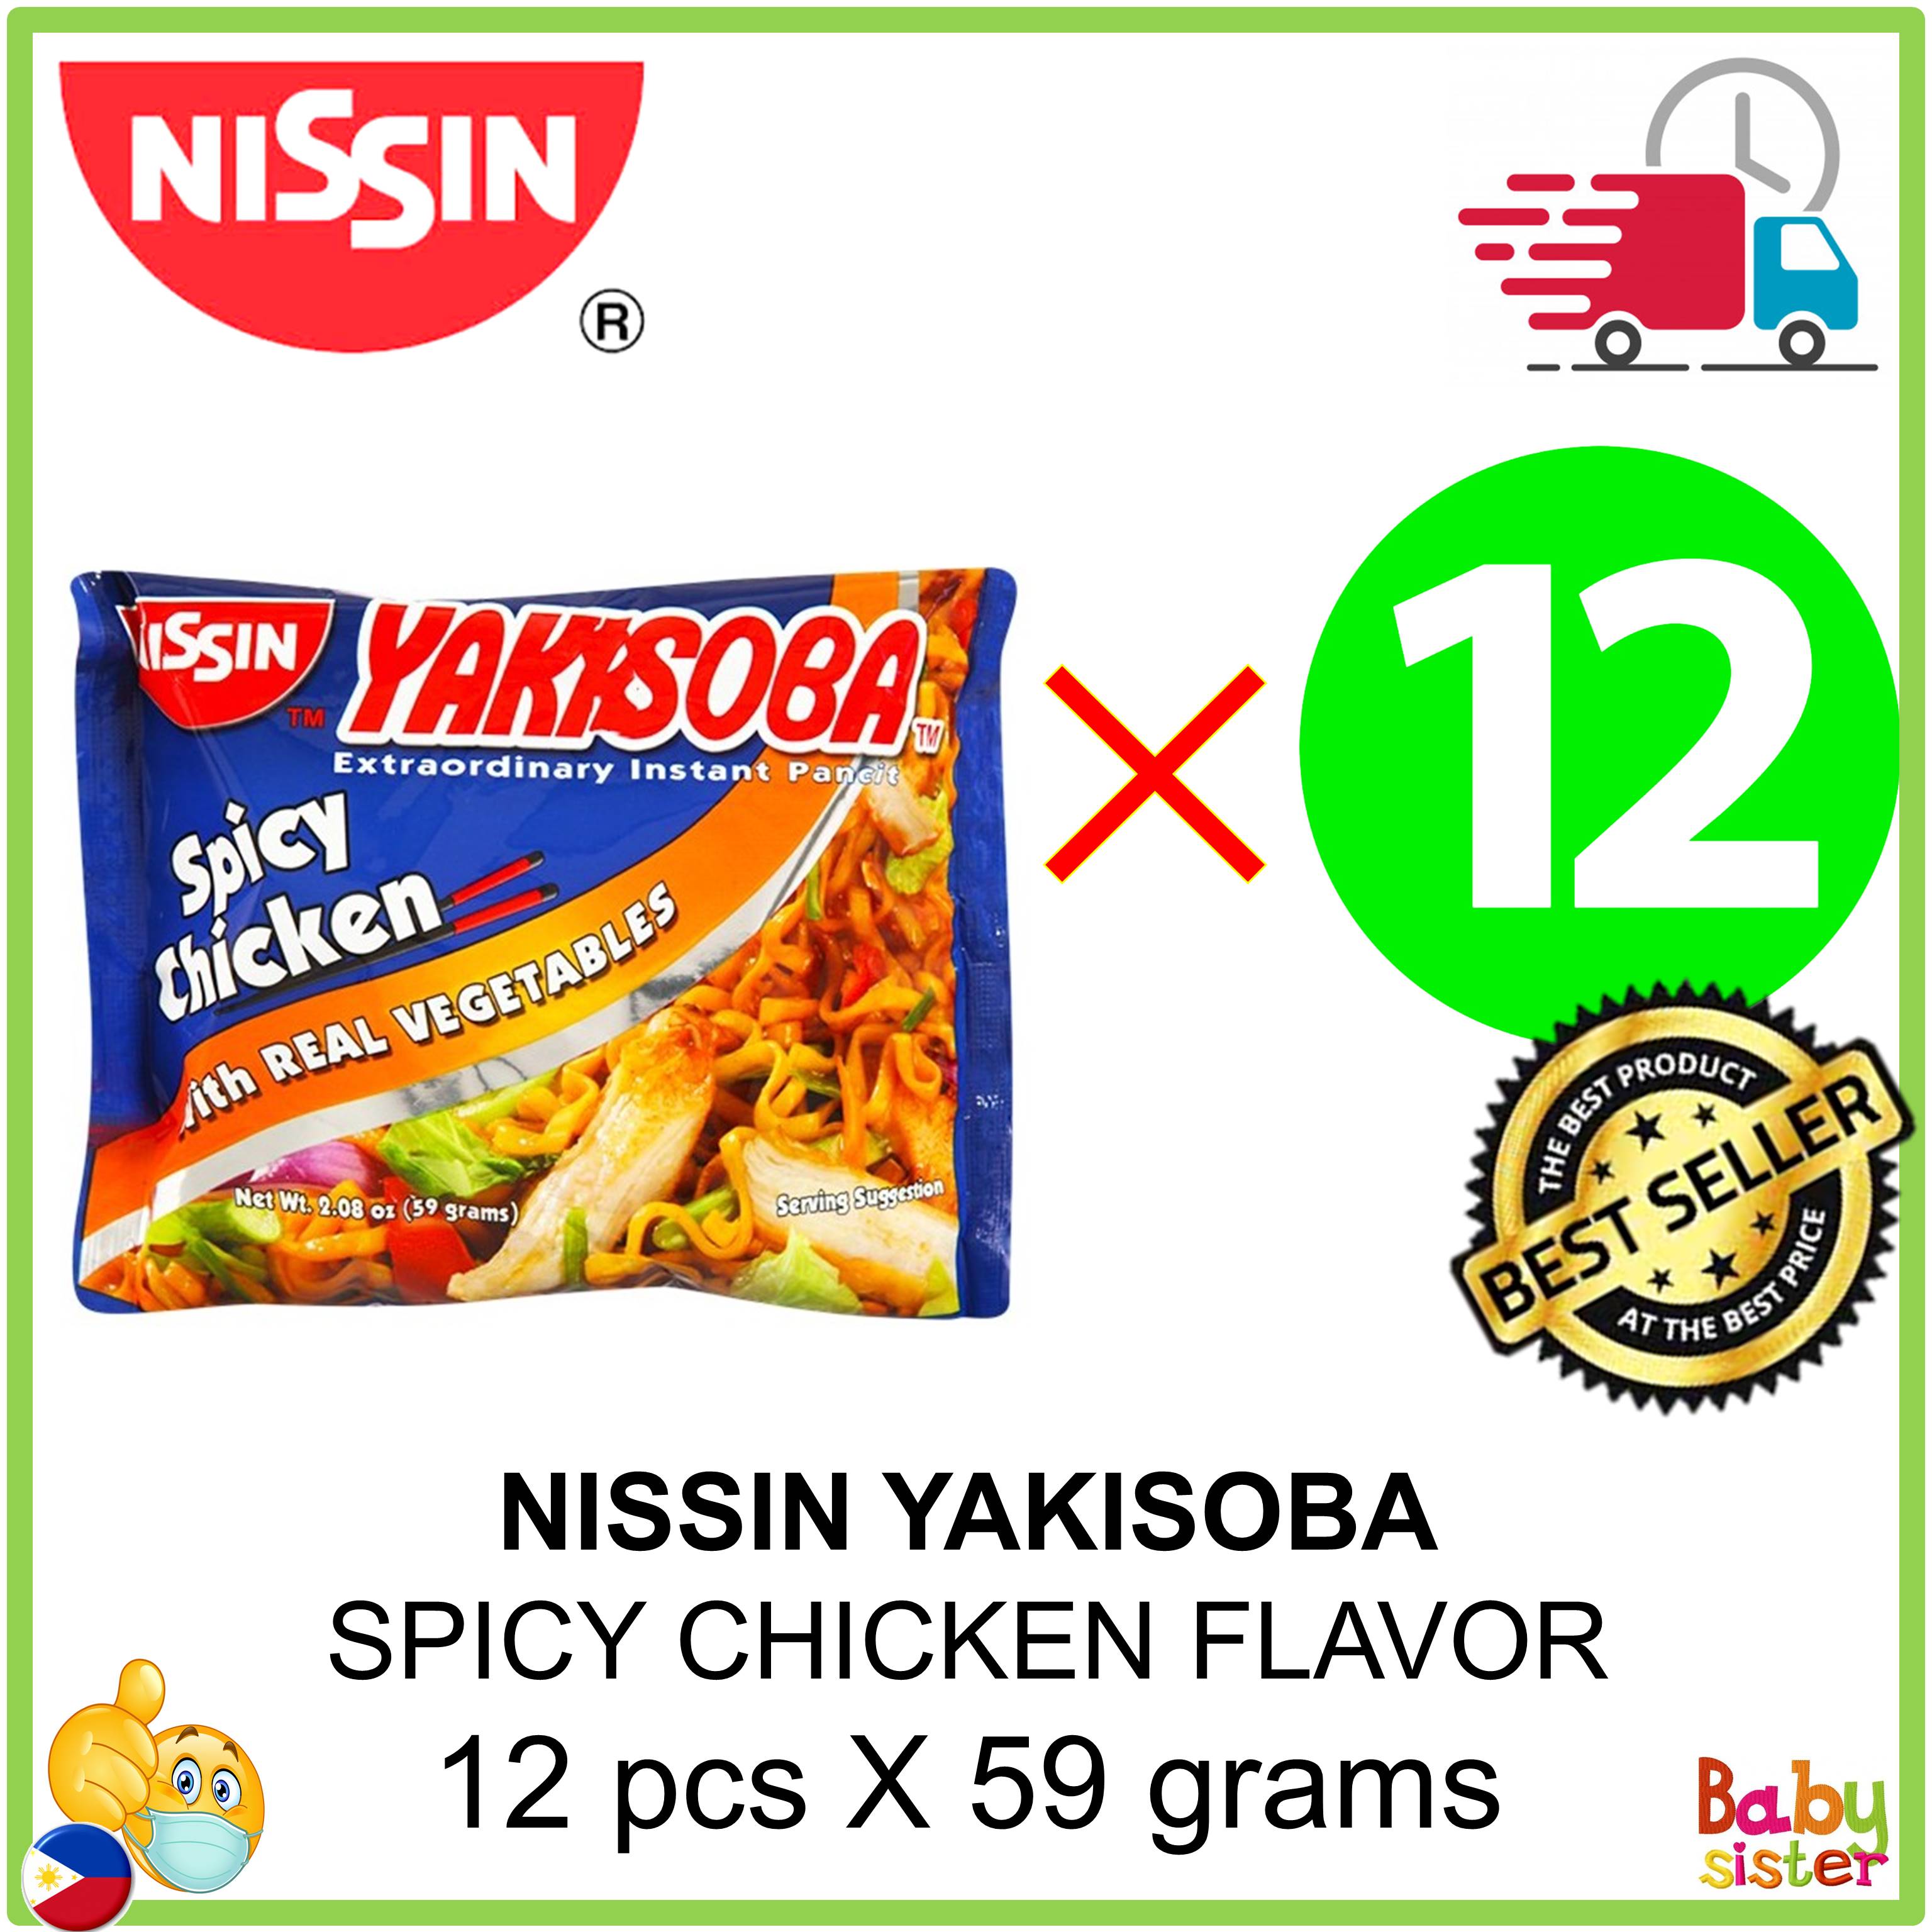 NISSIN CUP NOODLES BEEF FLAVOR 40 GRAMS X 12 PCS FROM BABY SISTER